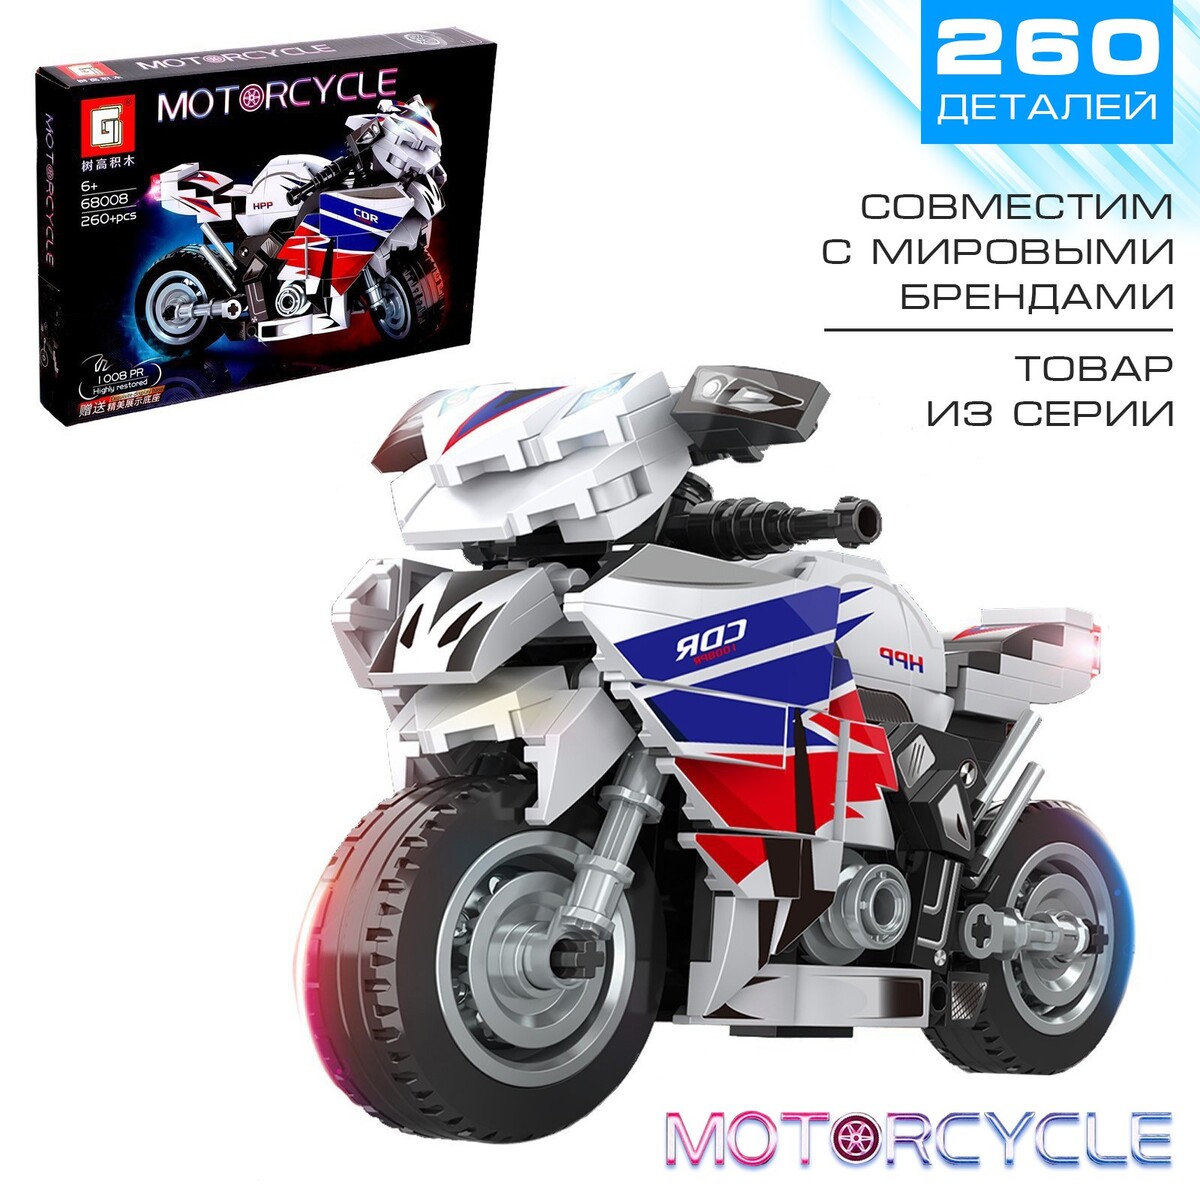   motorcycle, 260  6+